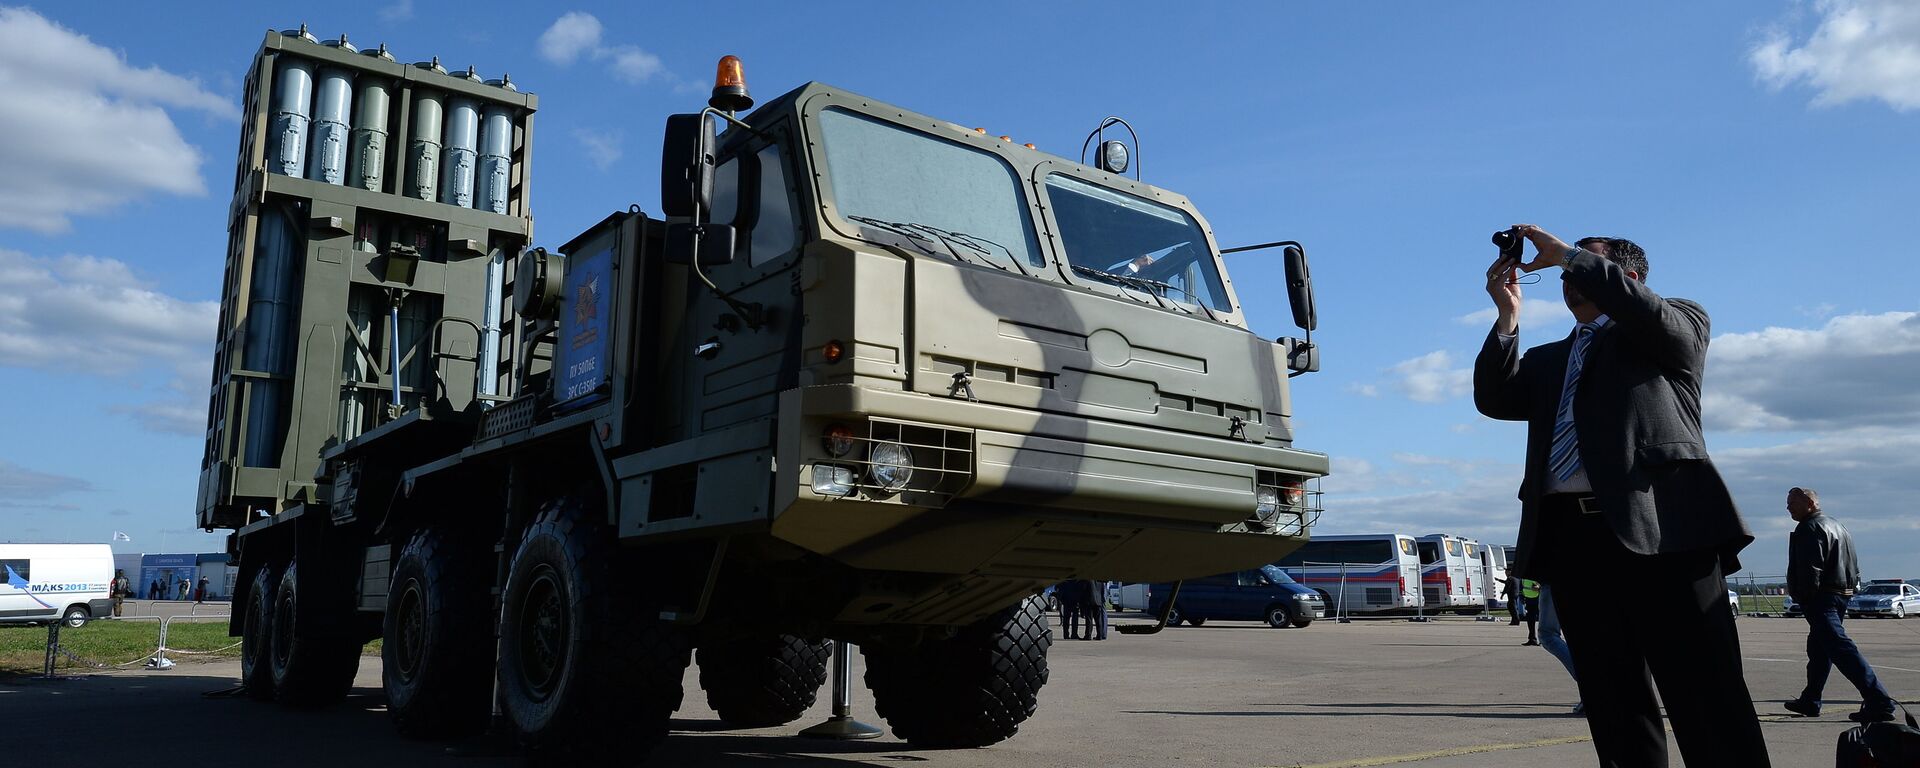 Anti-aircraft guided missile system Vityaz at the MAKS-2013 Air Show in Zhukovsky, the Moscow suburbs - Sputnik International, 1920, 26.02.2020